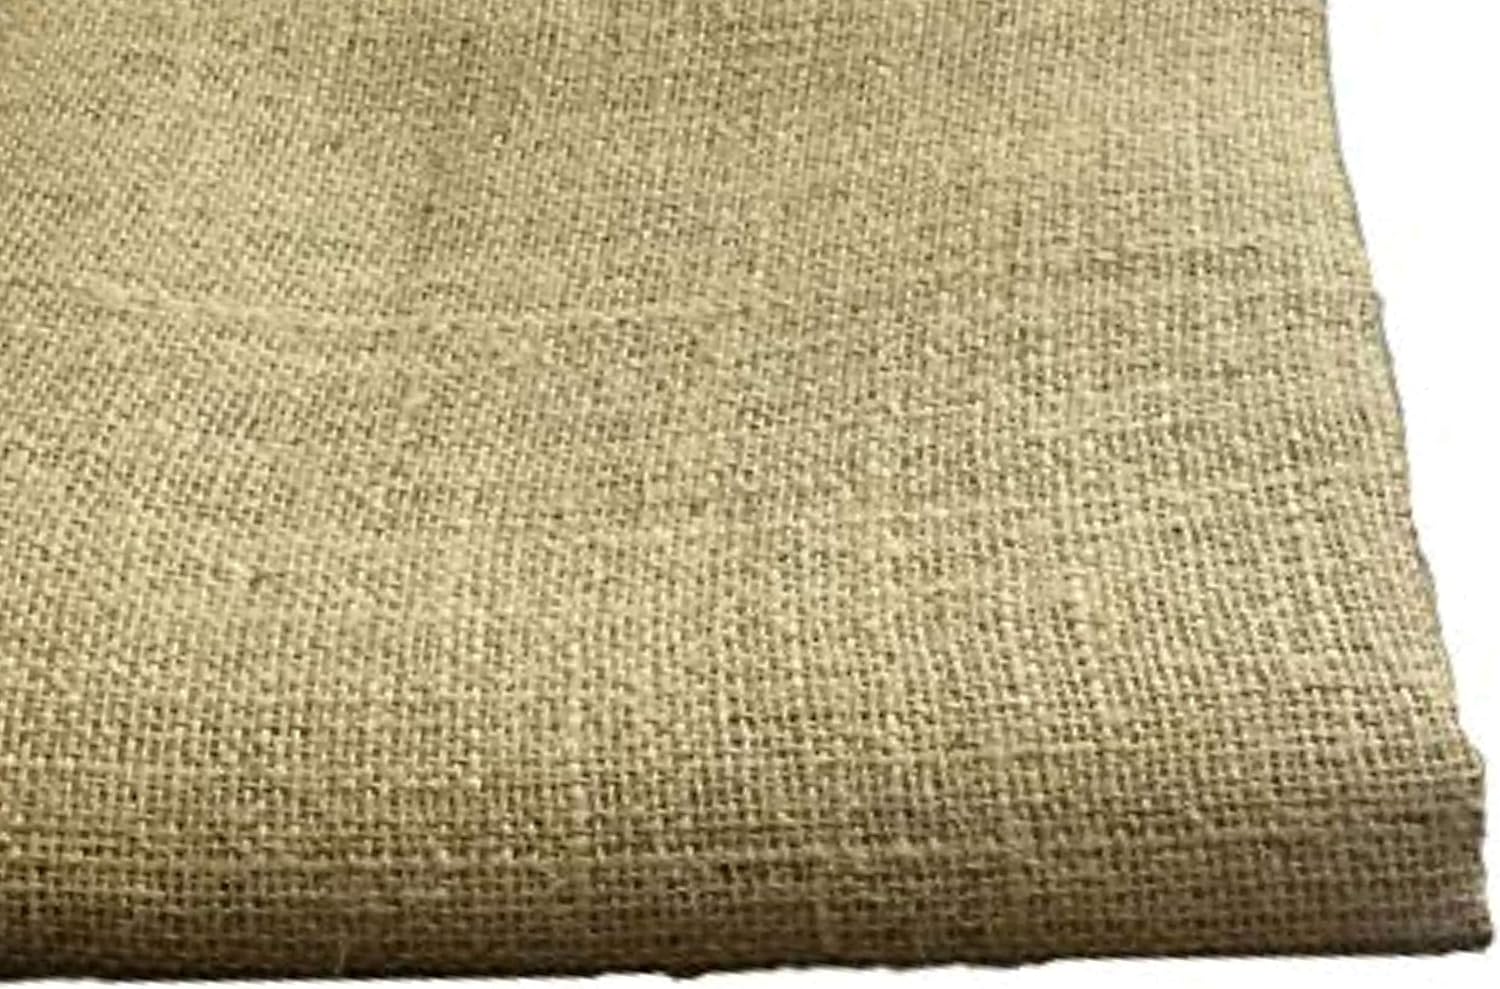 Burlap Roll Jute Fabric with Twines 